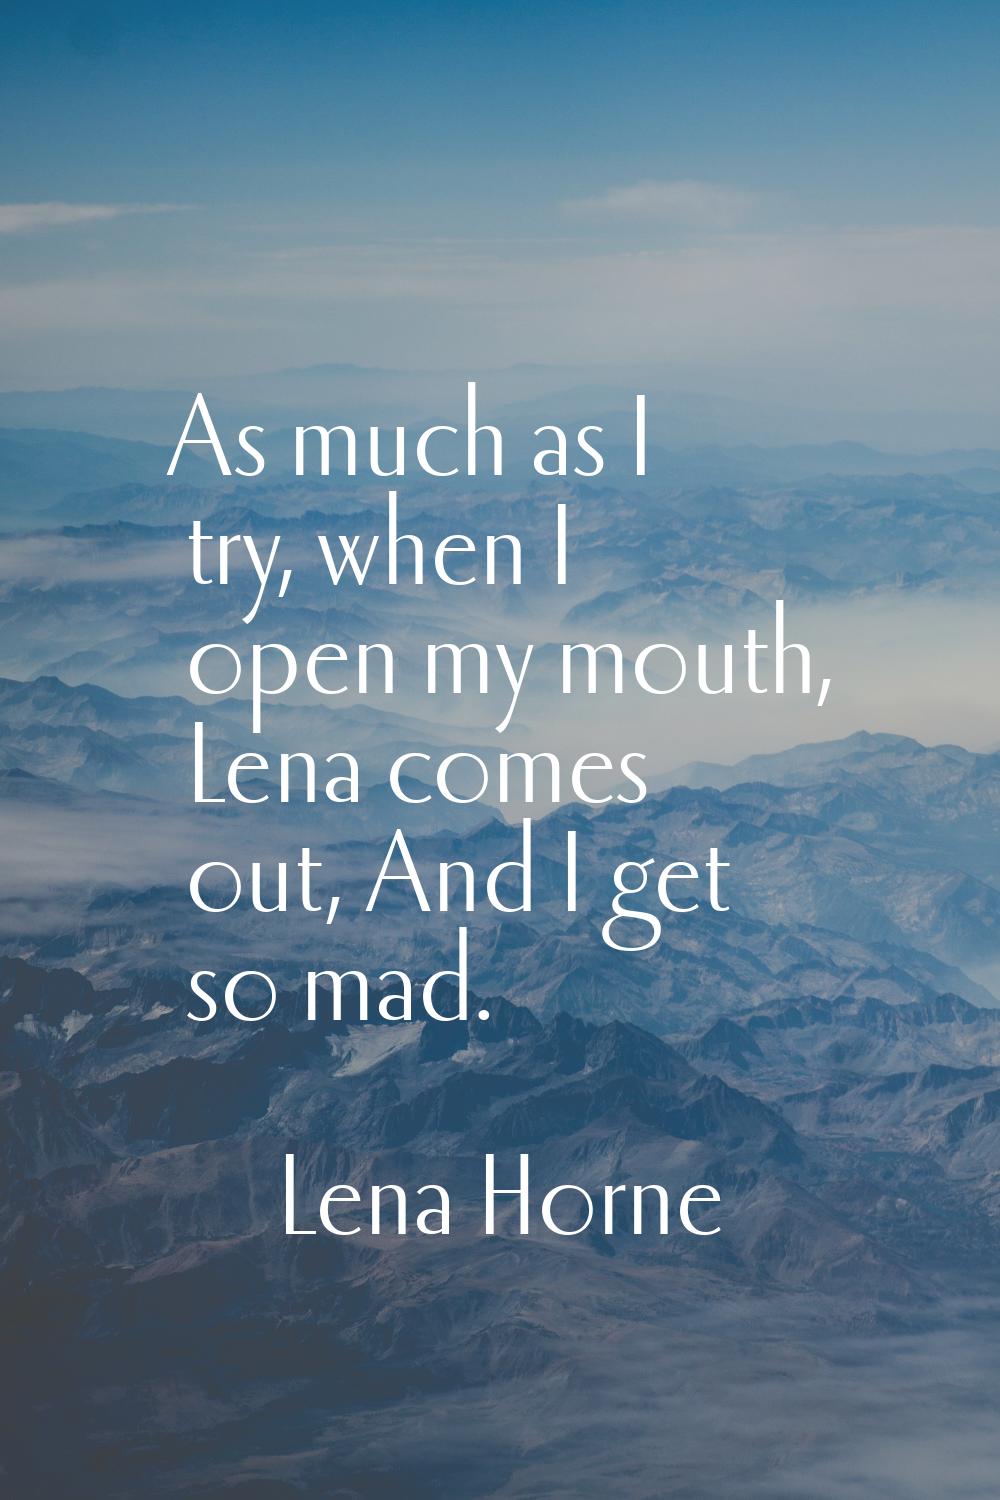 As much as I try, when I open my mouth, Lena comes out, And I get so mad.